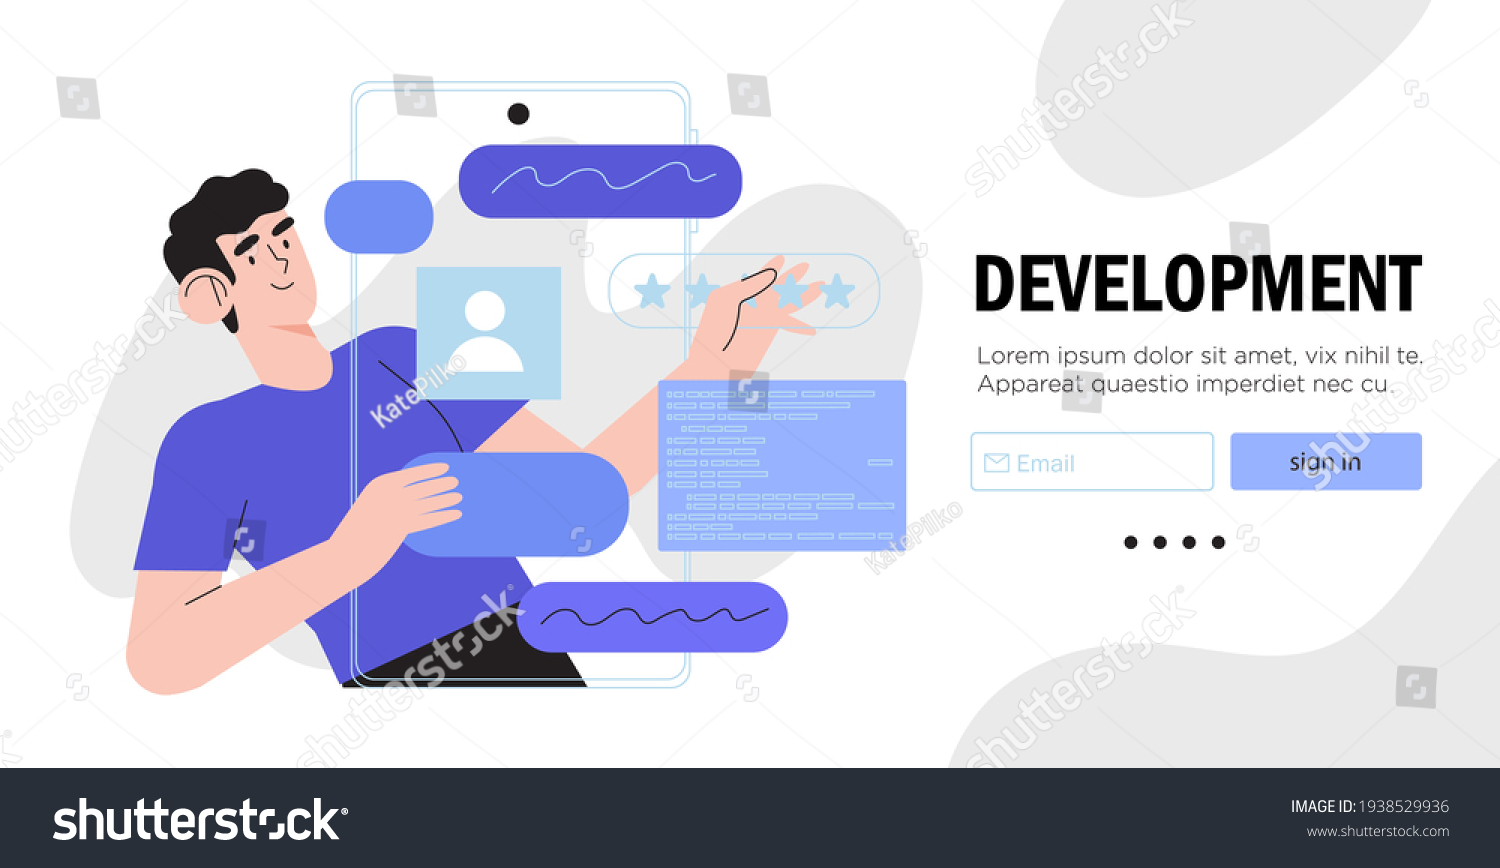 SVG of Design and programming banner, web landing page, advertisement. Designer working on ui ux design or mobile application. Studio or agency prototyping or coding web page or mobile app. Cms development. svg